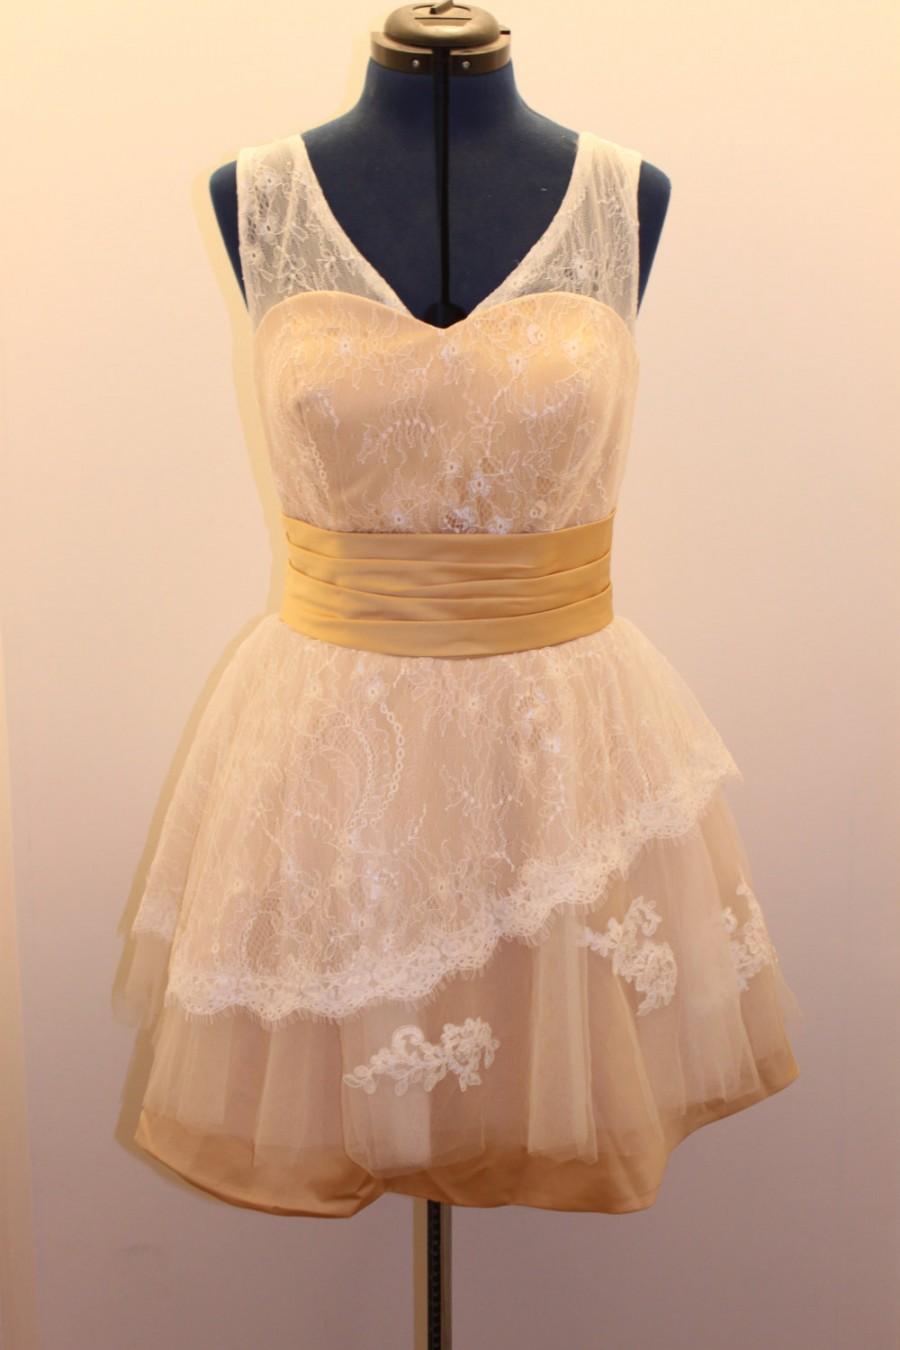 Mariage - 50s inspired short wedding dress in lace, tulle and satin custom made V-cut back exclusive french design